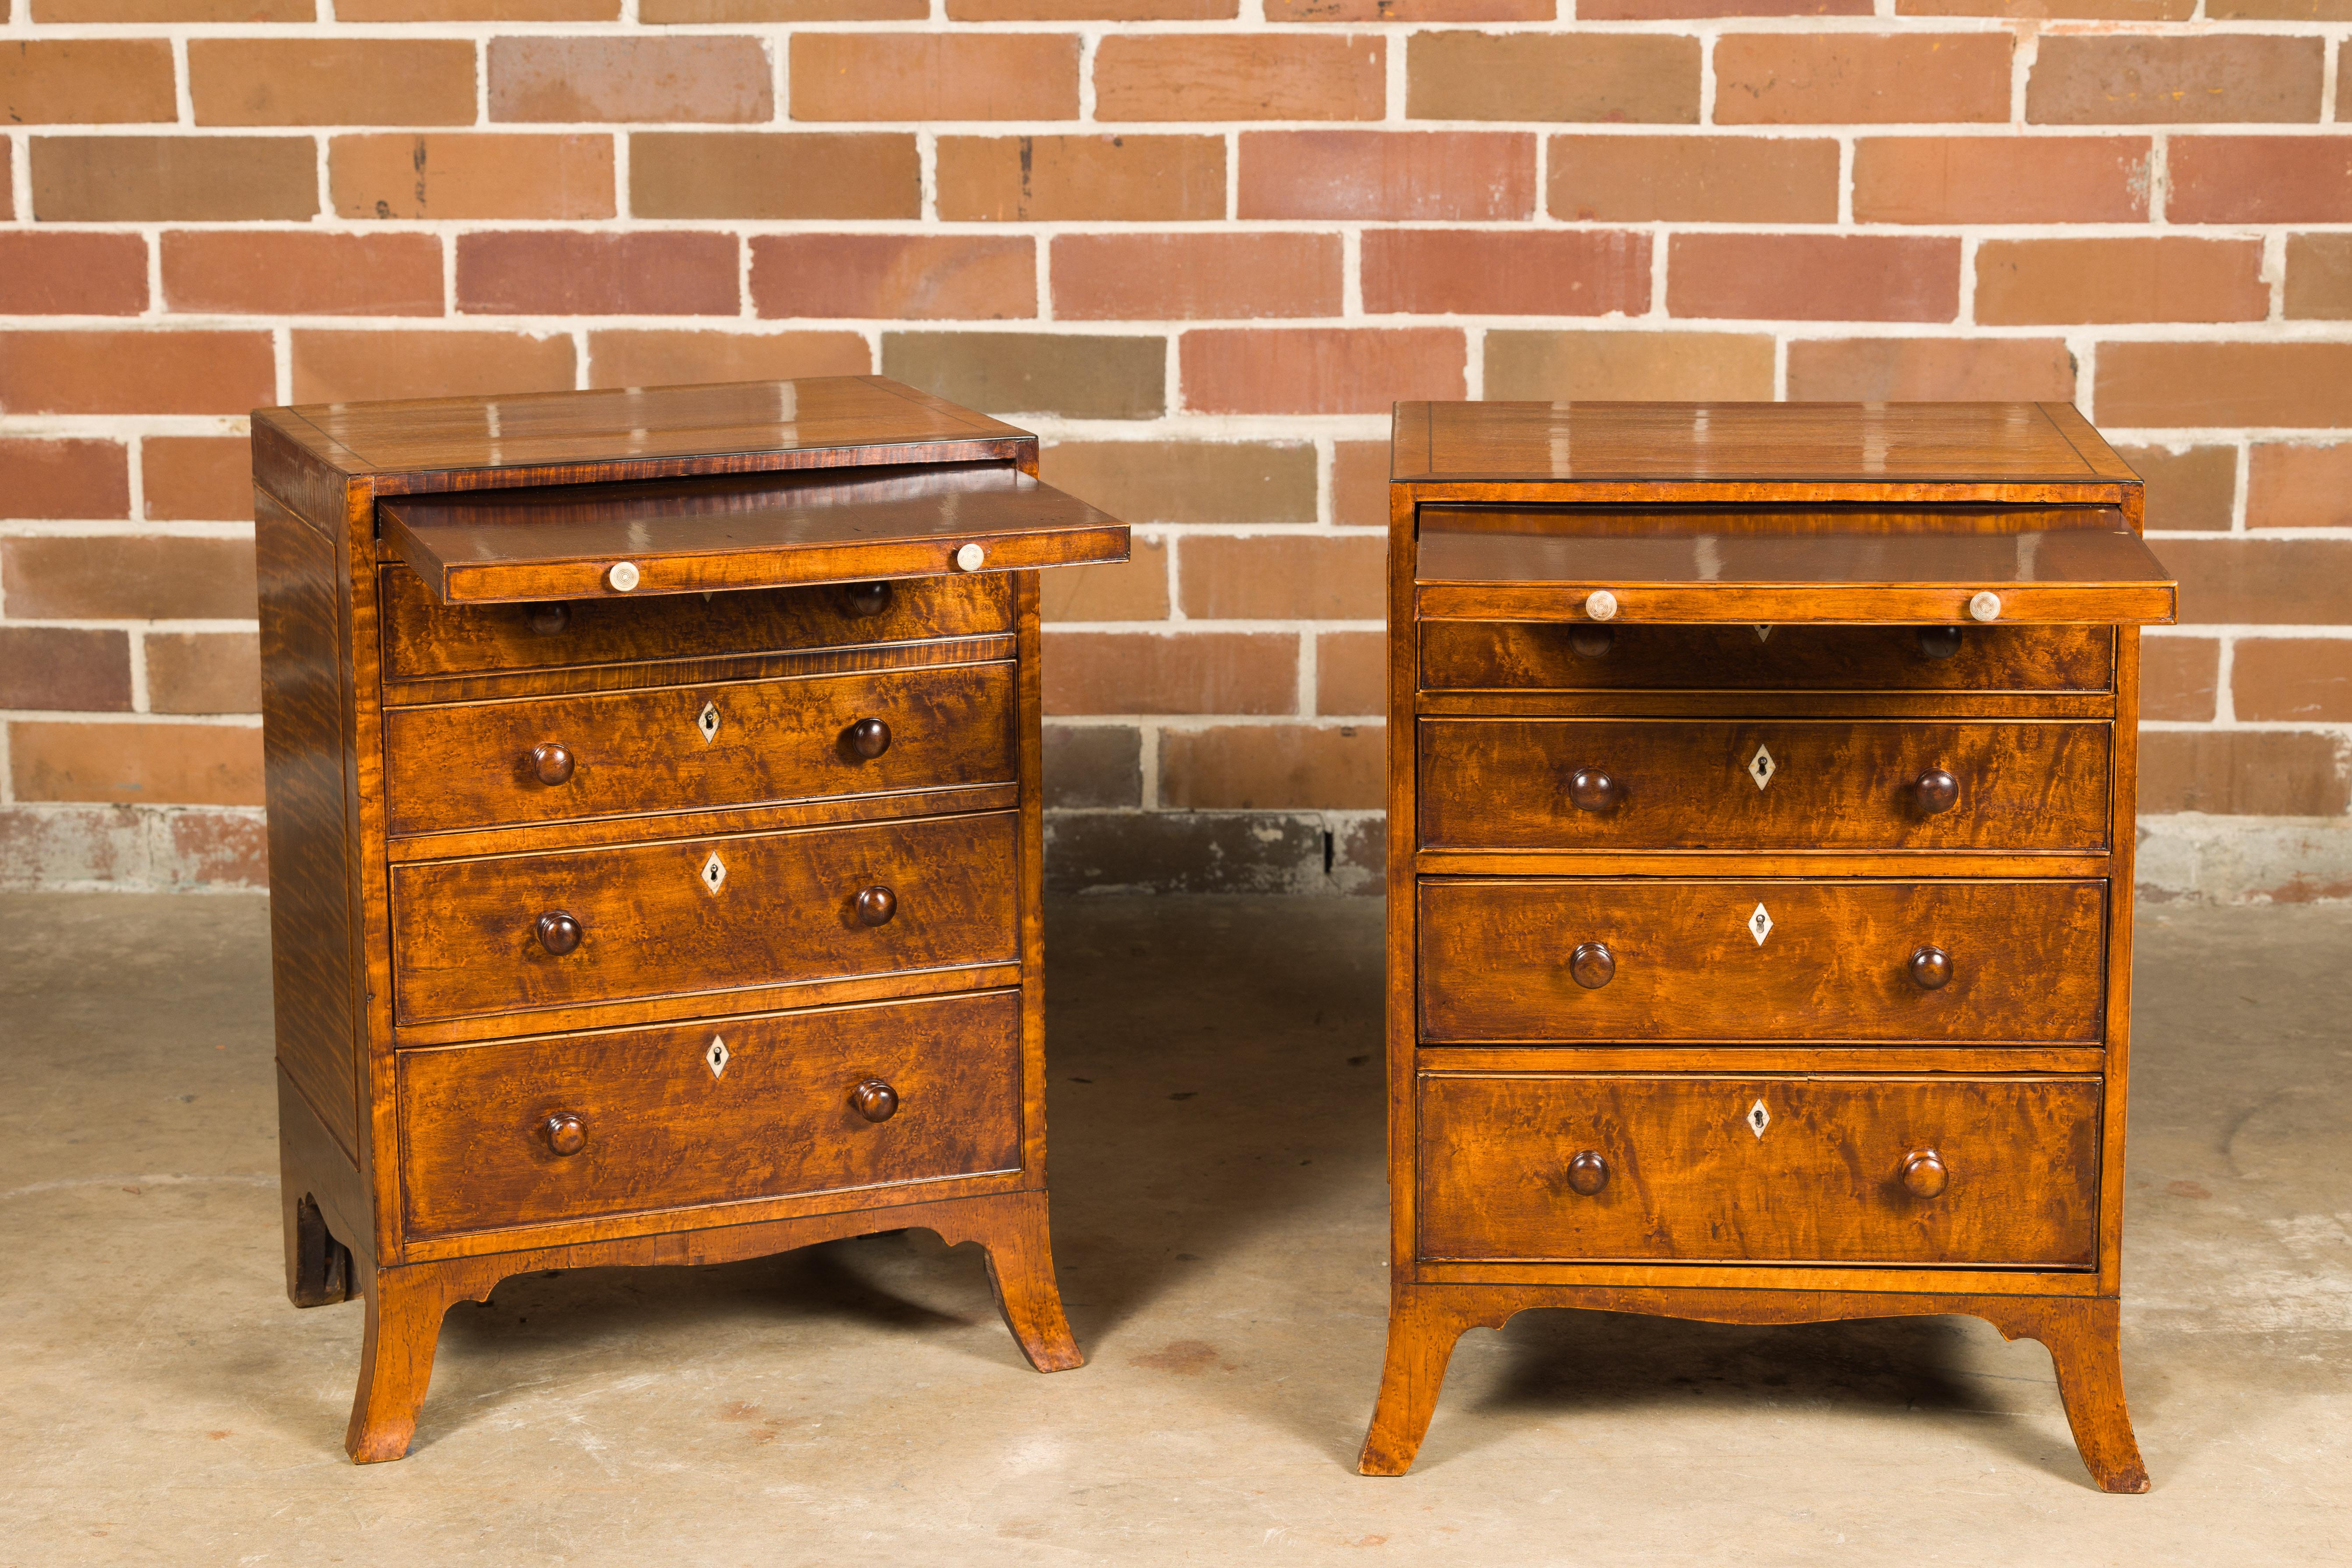 19th Century English Regency Period 1820s Bedside Chests with Graduating Drawers For Sale